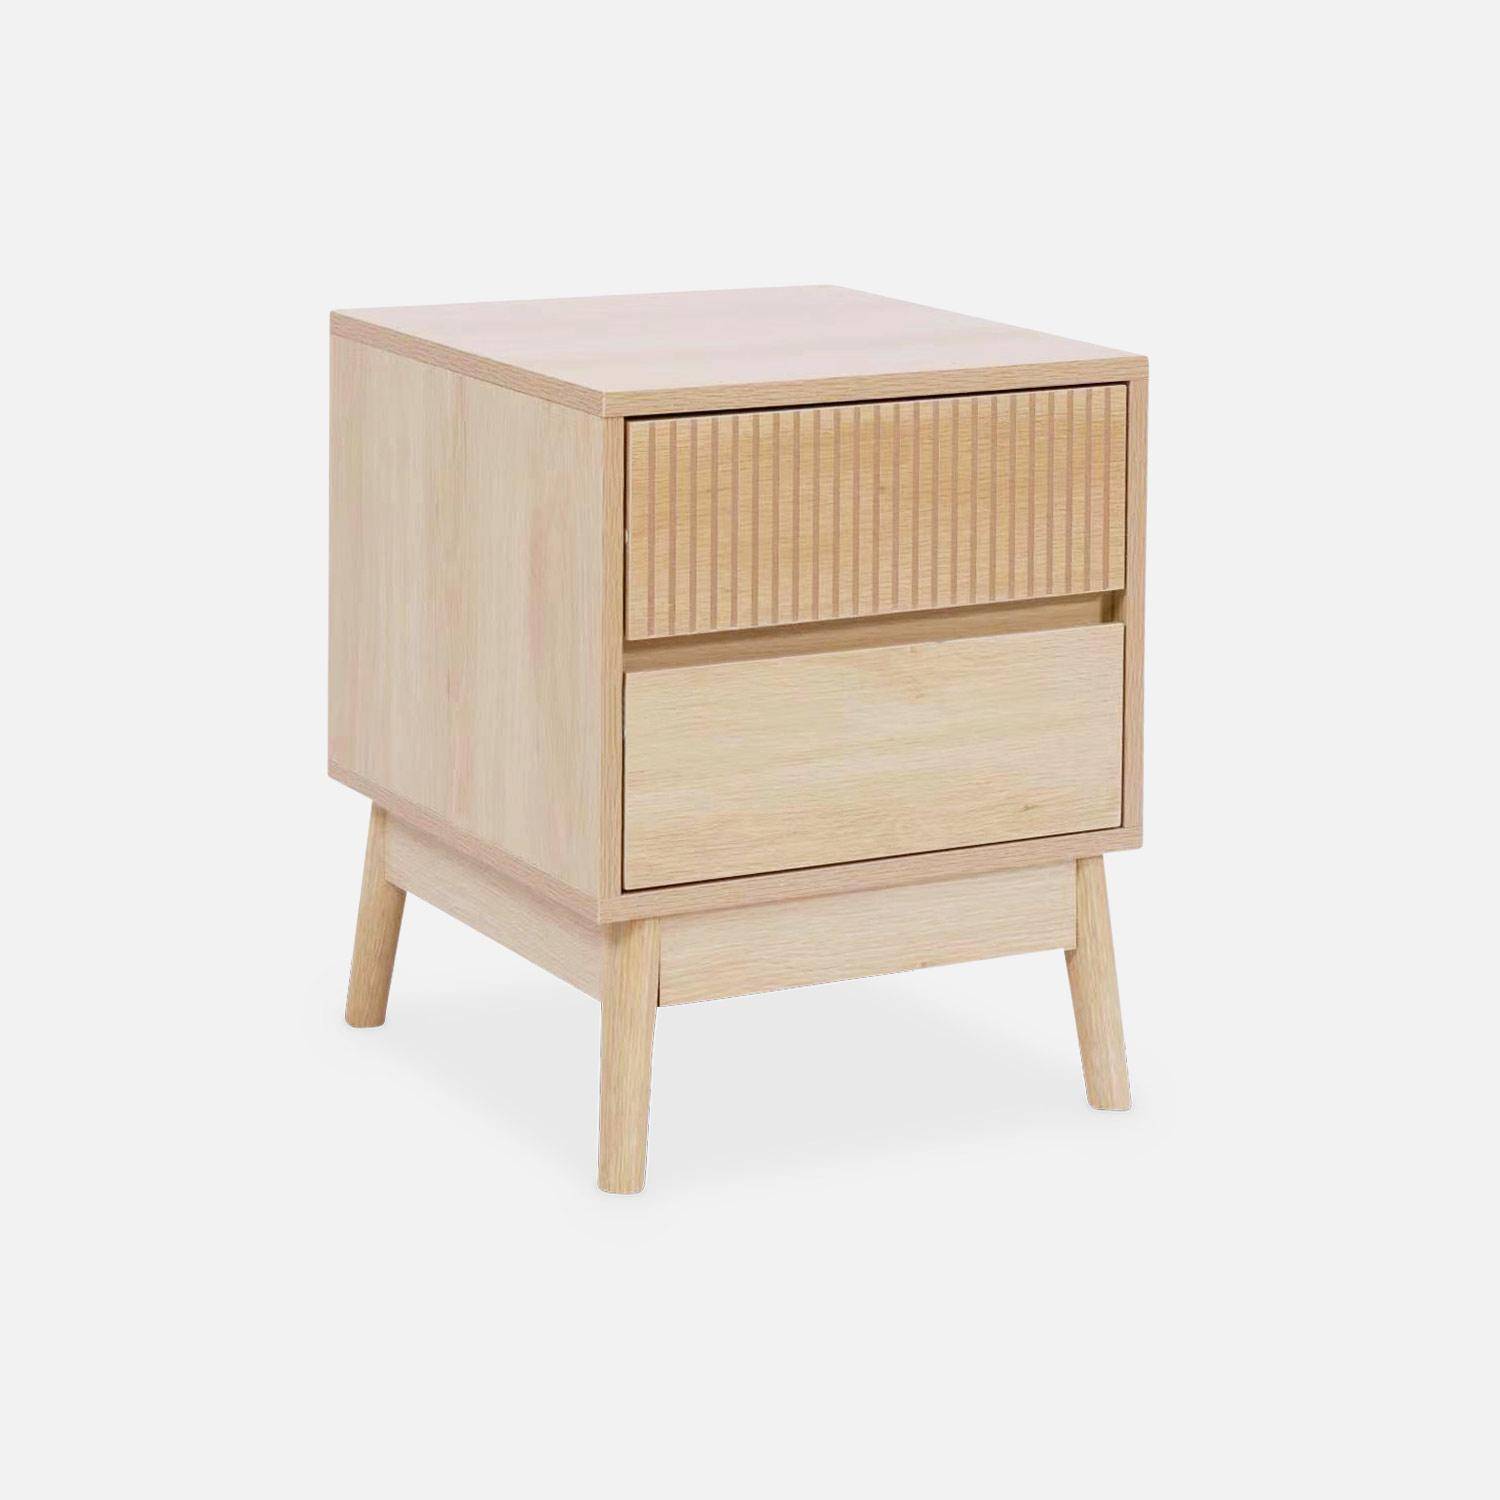 Grooved wooden bedside table with 2 drawers, 40x39x48cm, Linear - Natural Wood colour,sweeek,Photo3